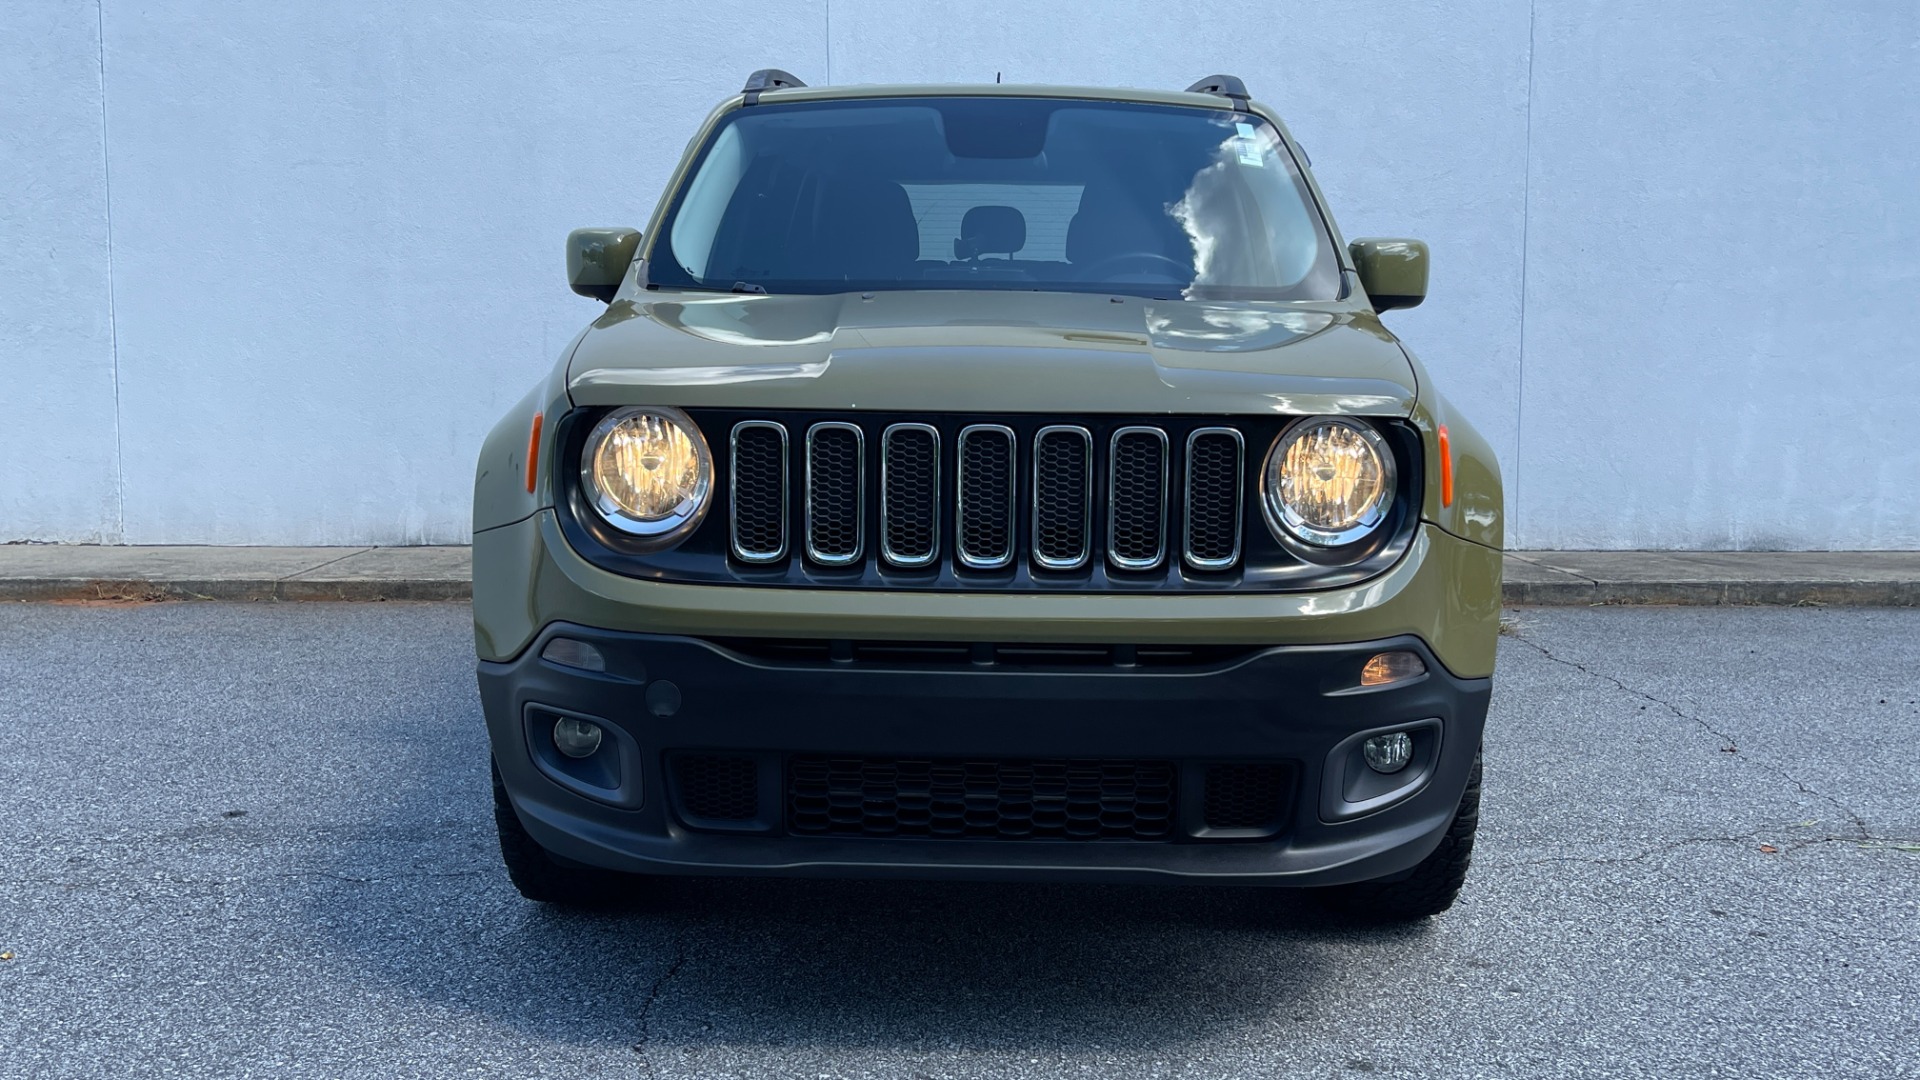 Used 2015 Jeep Renegade LATITUDE / 2.4L ENGINE / KEYLESS ENTRY / REMOTE START for sale $17,495 at Formula Imports in Charlotte NC 28227 2